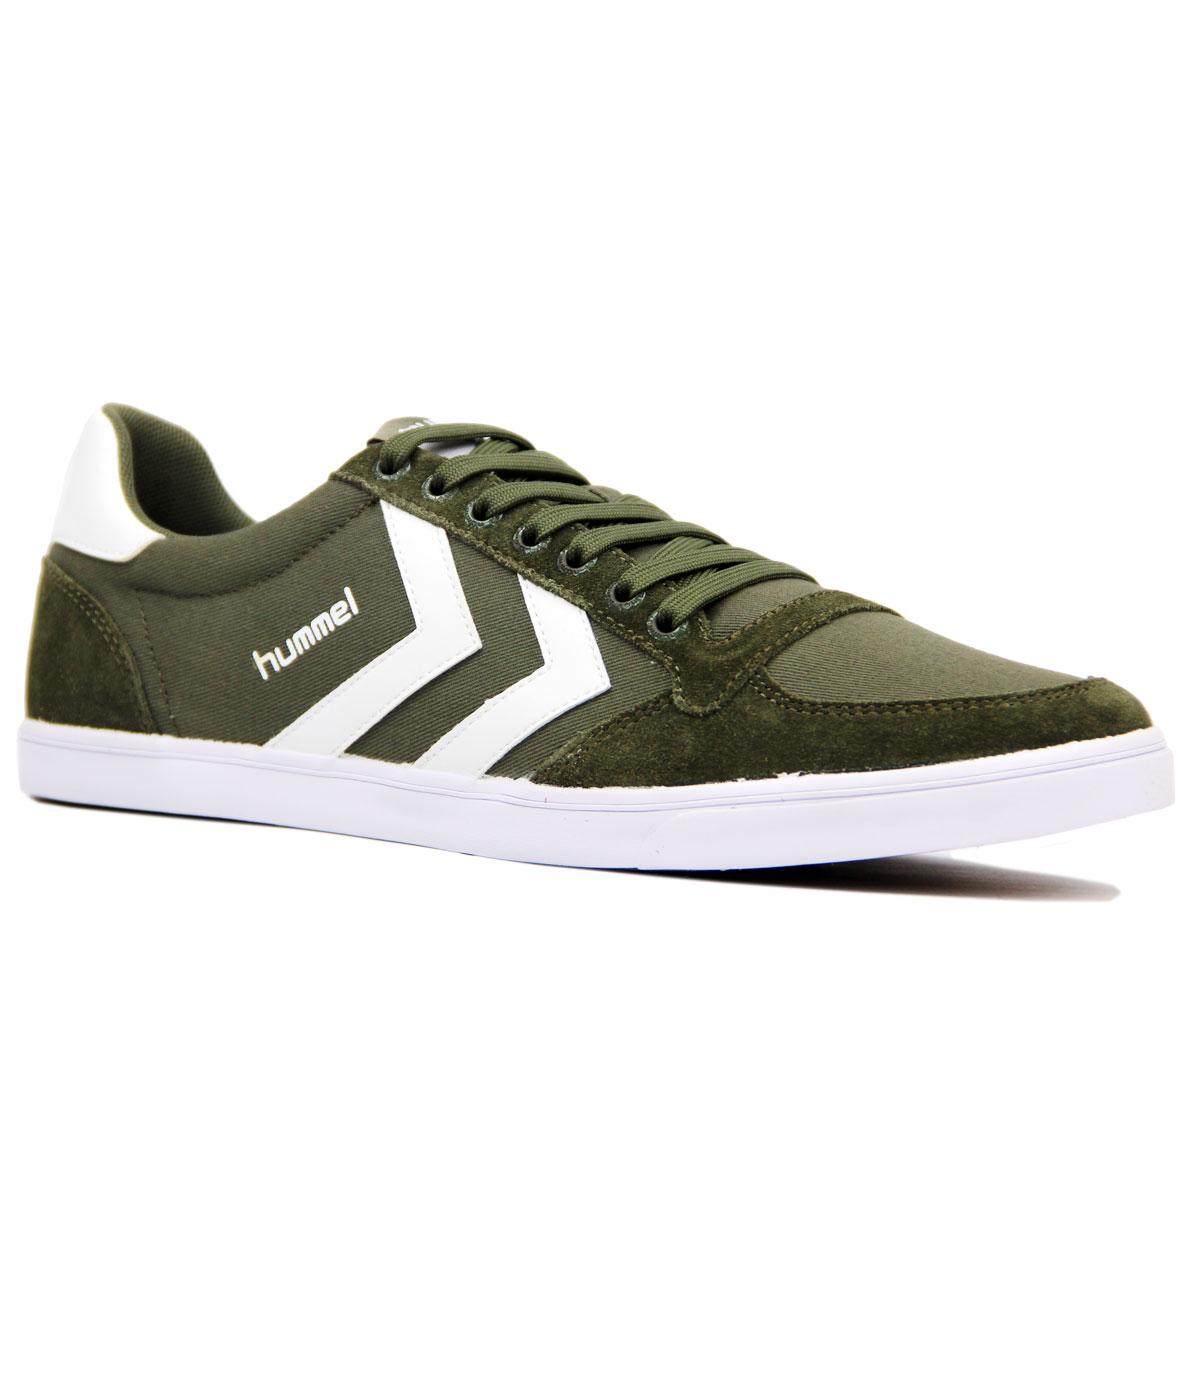 HUMMEL Slimmer Stadil Low Canvas Retro Trainers IG